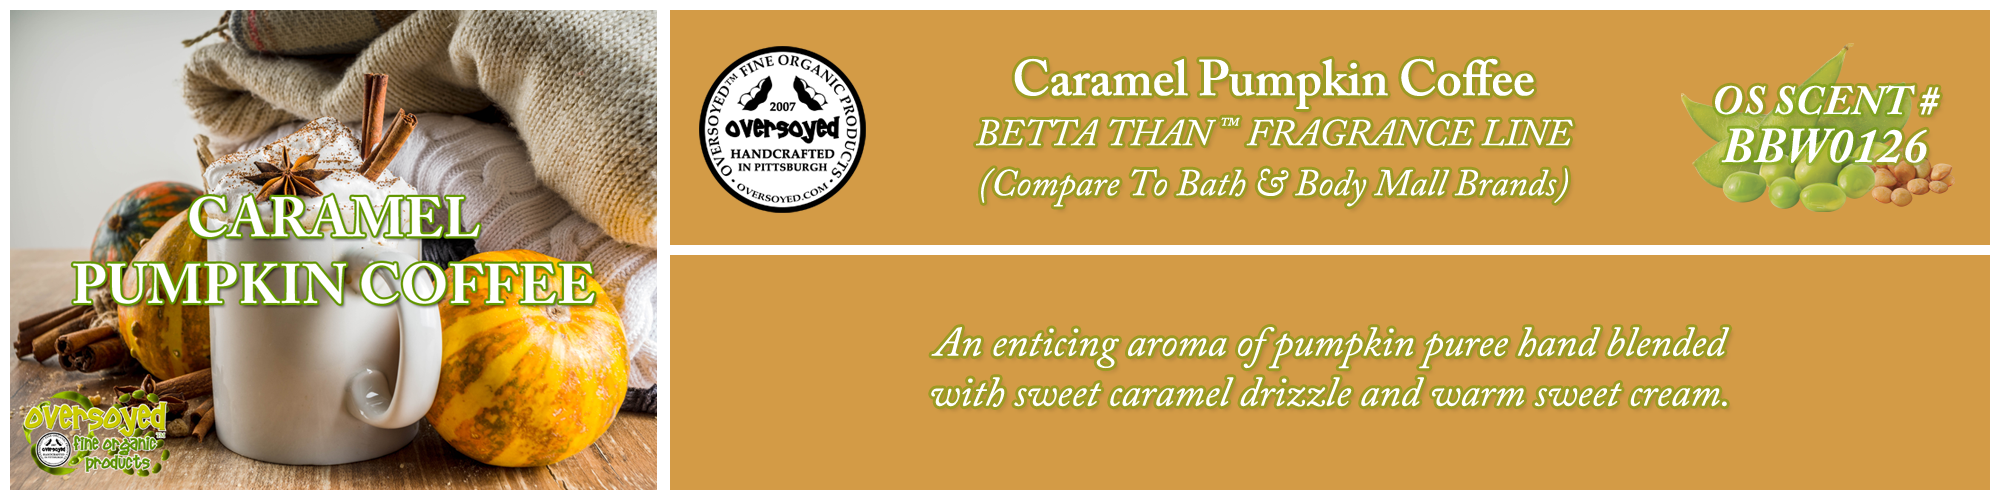 Caramel Pumpkin Coffee Handcrafted Products Collection